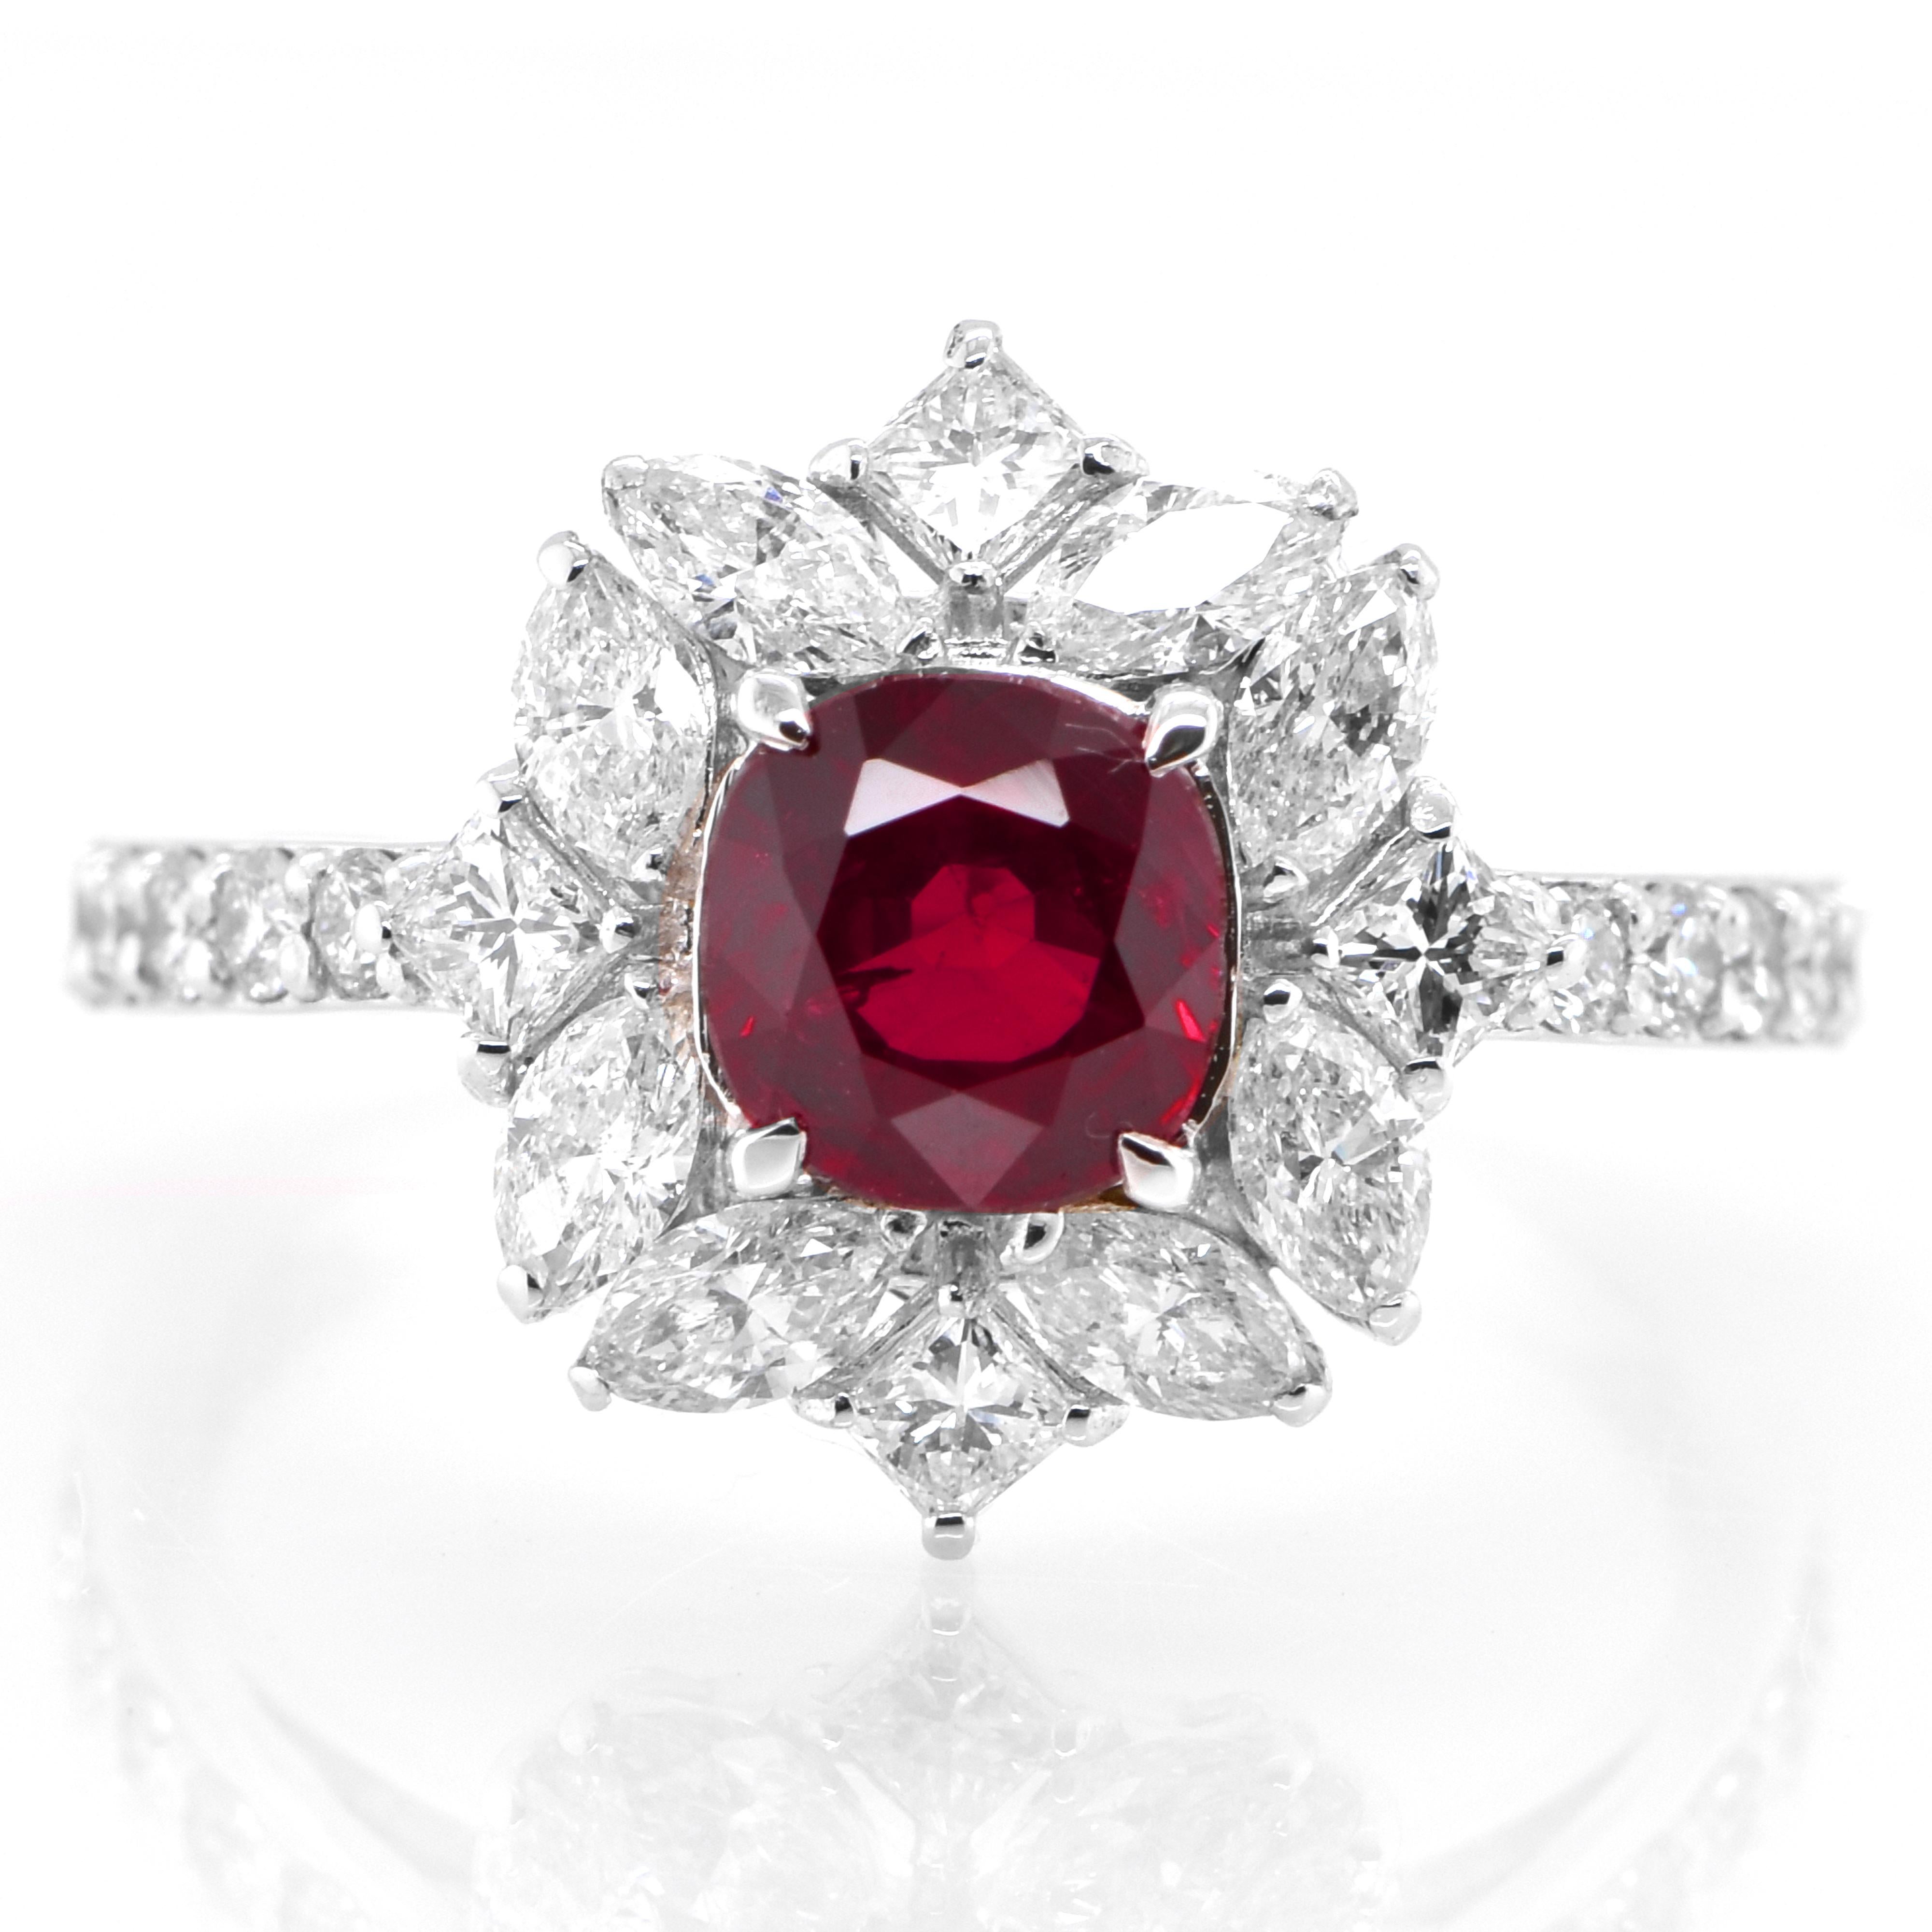 A beautiful ring set in Platinum featuring a GIA Certified 1.23 Carat Natural, Thailand (Siam) Ruby and 0.96 Carat Diamonds. Rubies are referred to as 